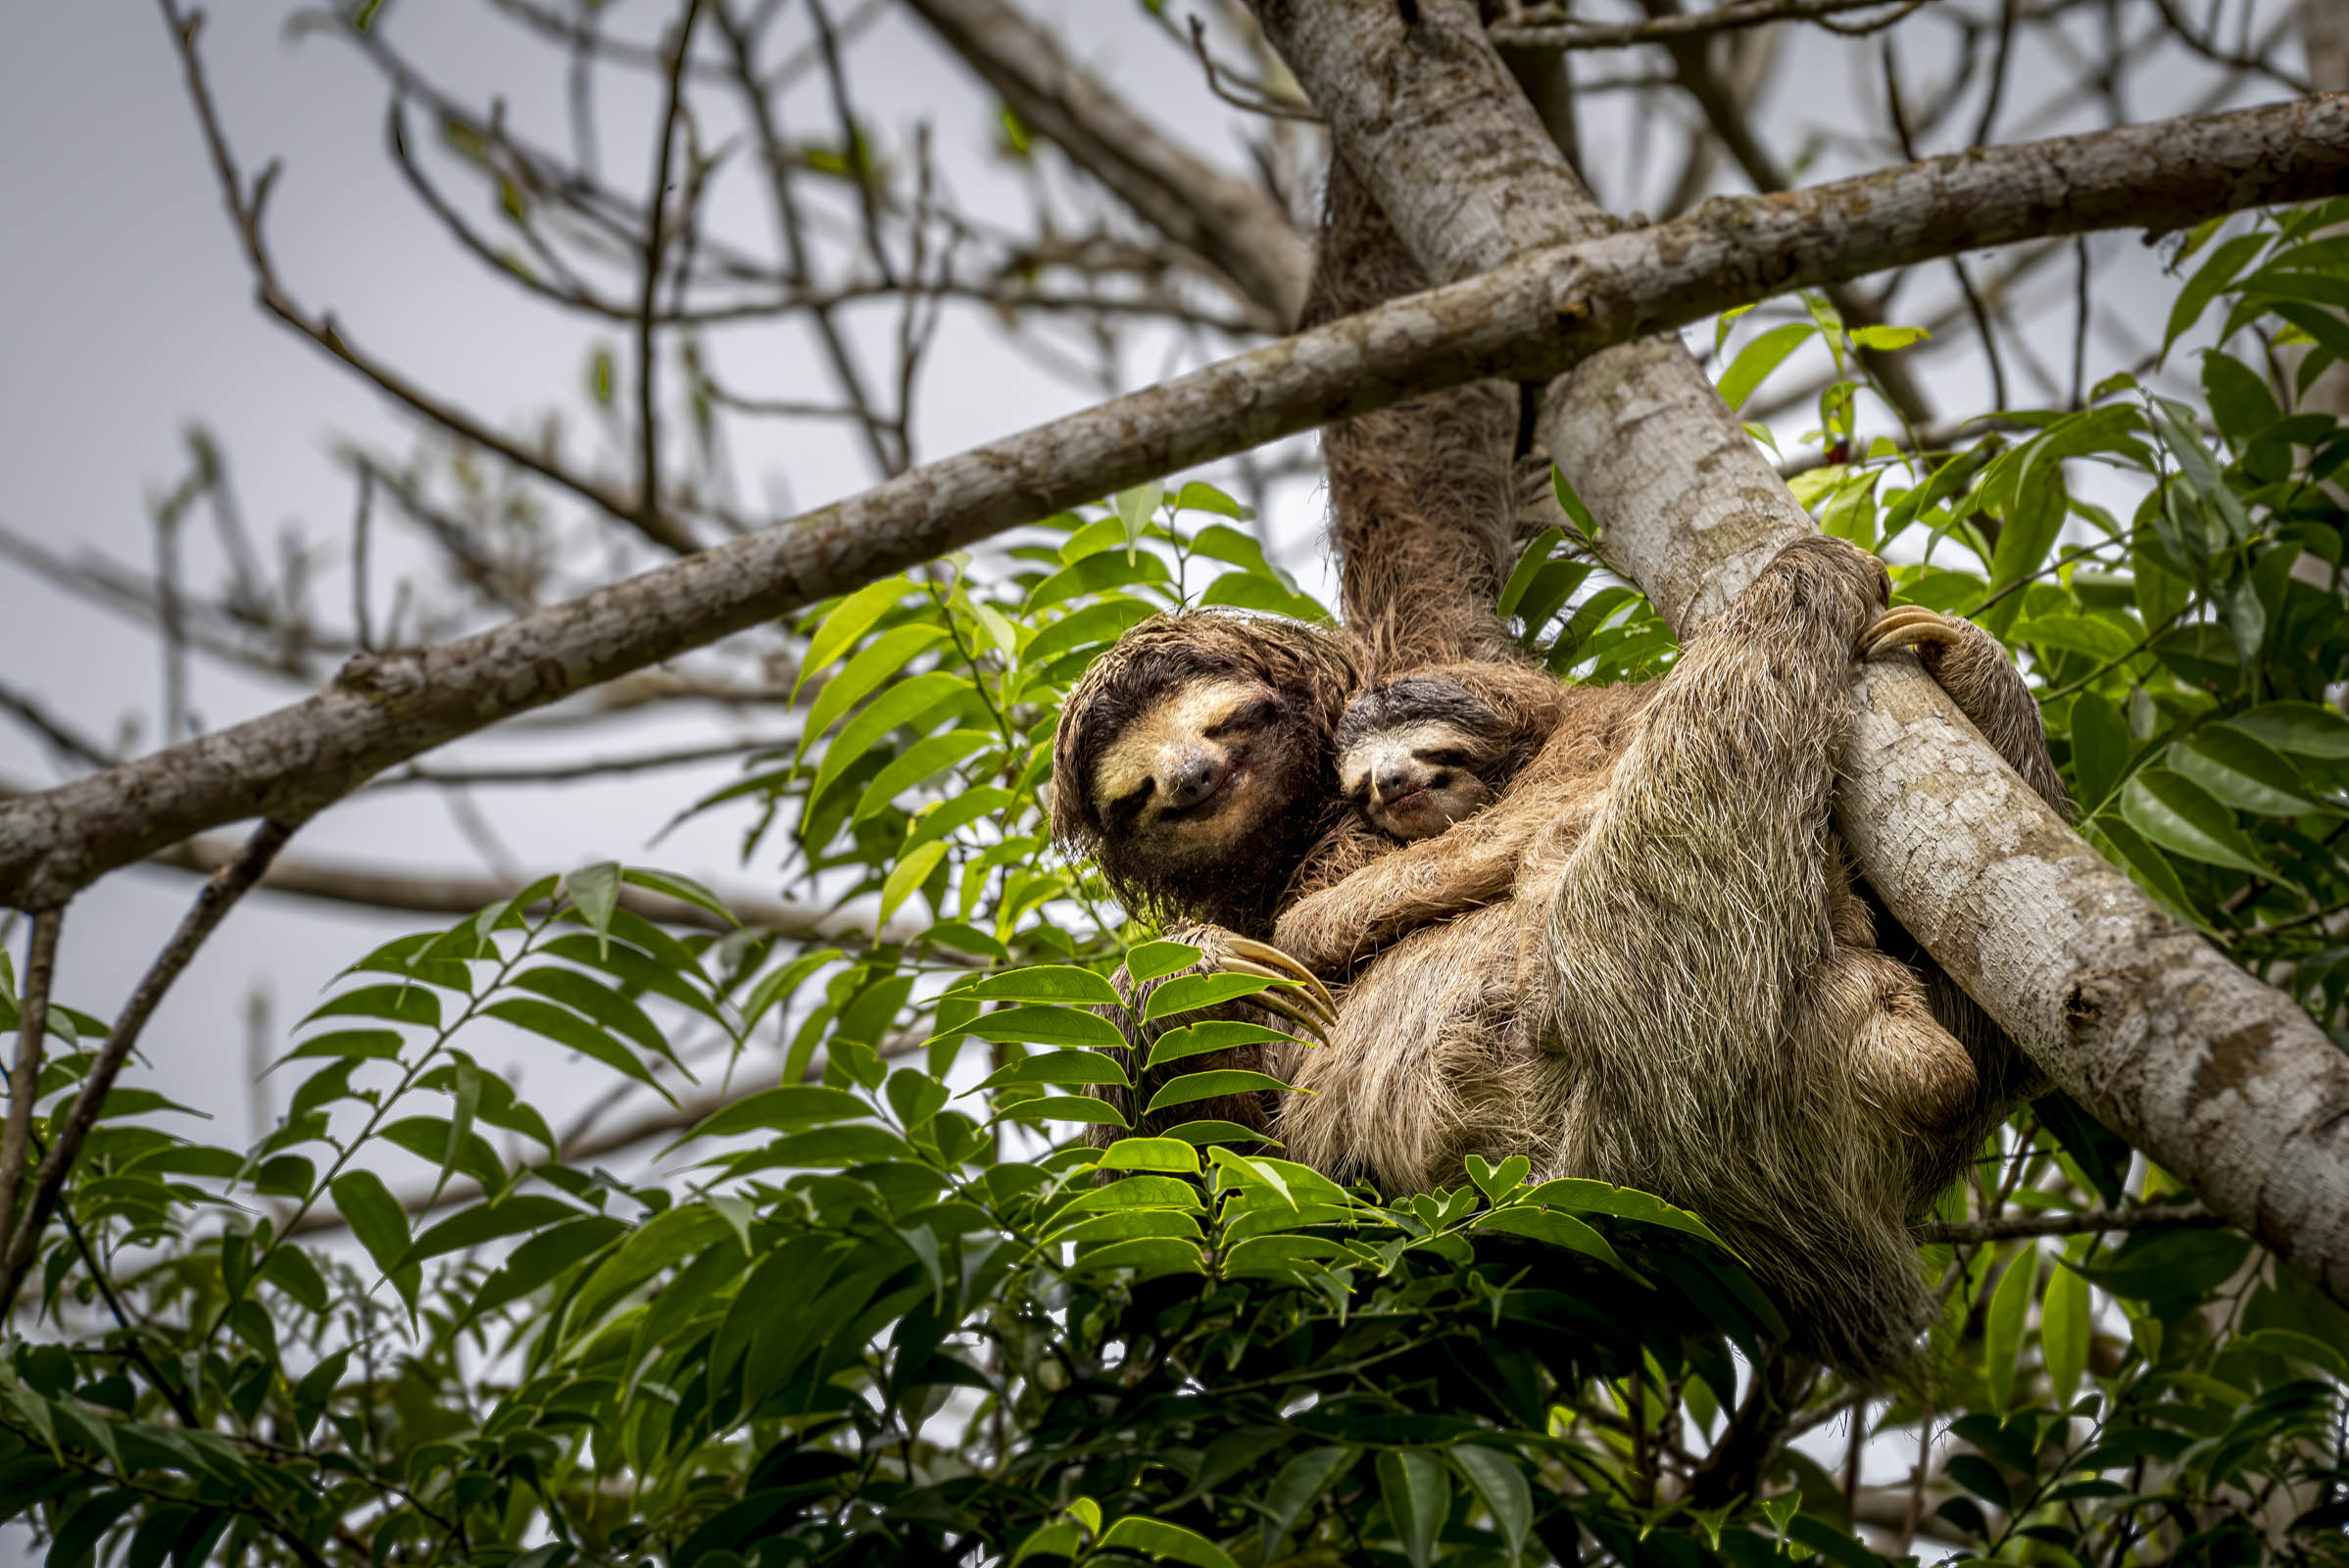 Sloth with baby